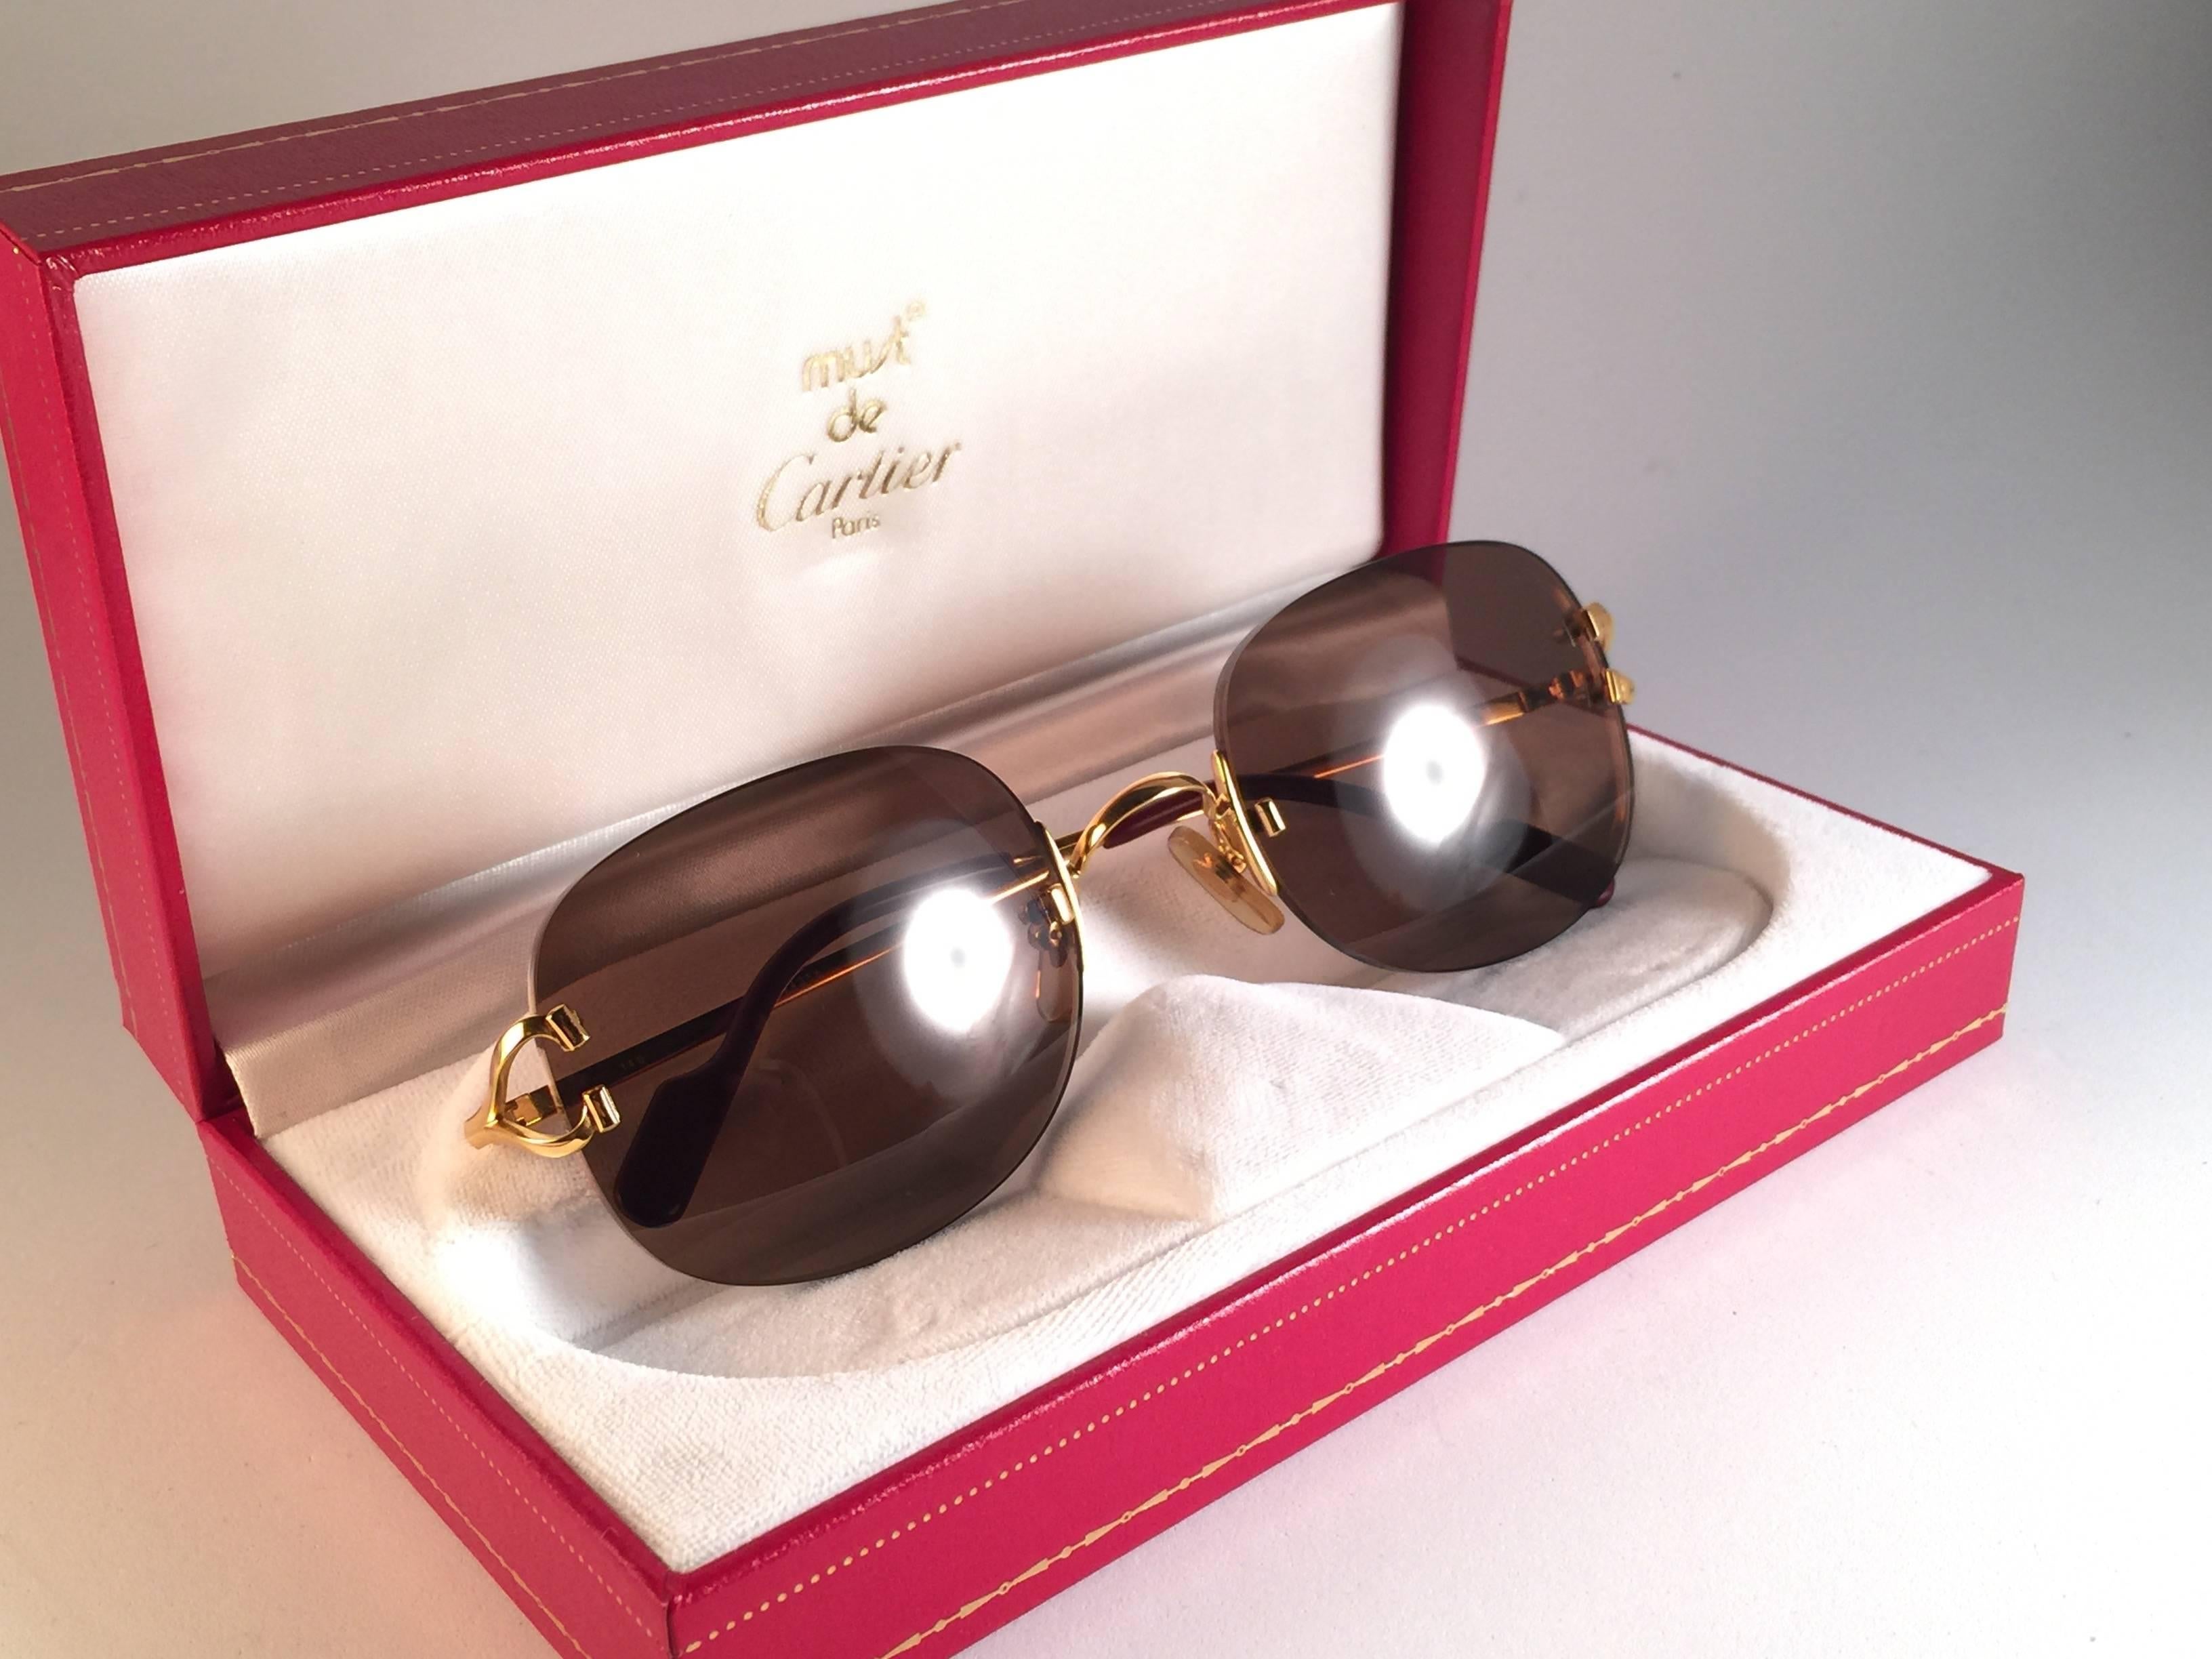 New Cartier Serrano unique rimless sunglasses with brown (uv protection) lenses. Frame with the front and sides in gold. All hallmarks. Cartier gold signs on the black ear paddles. These are like a pair of jewels on your nose. Beautiful design and a